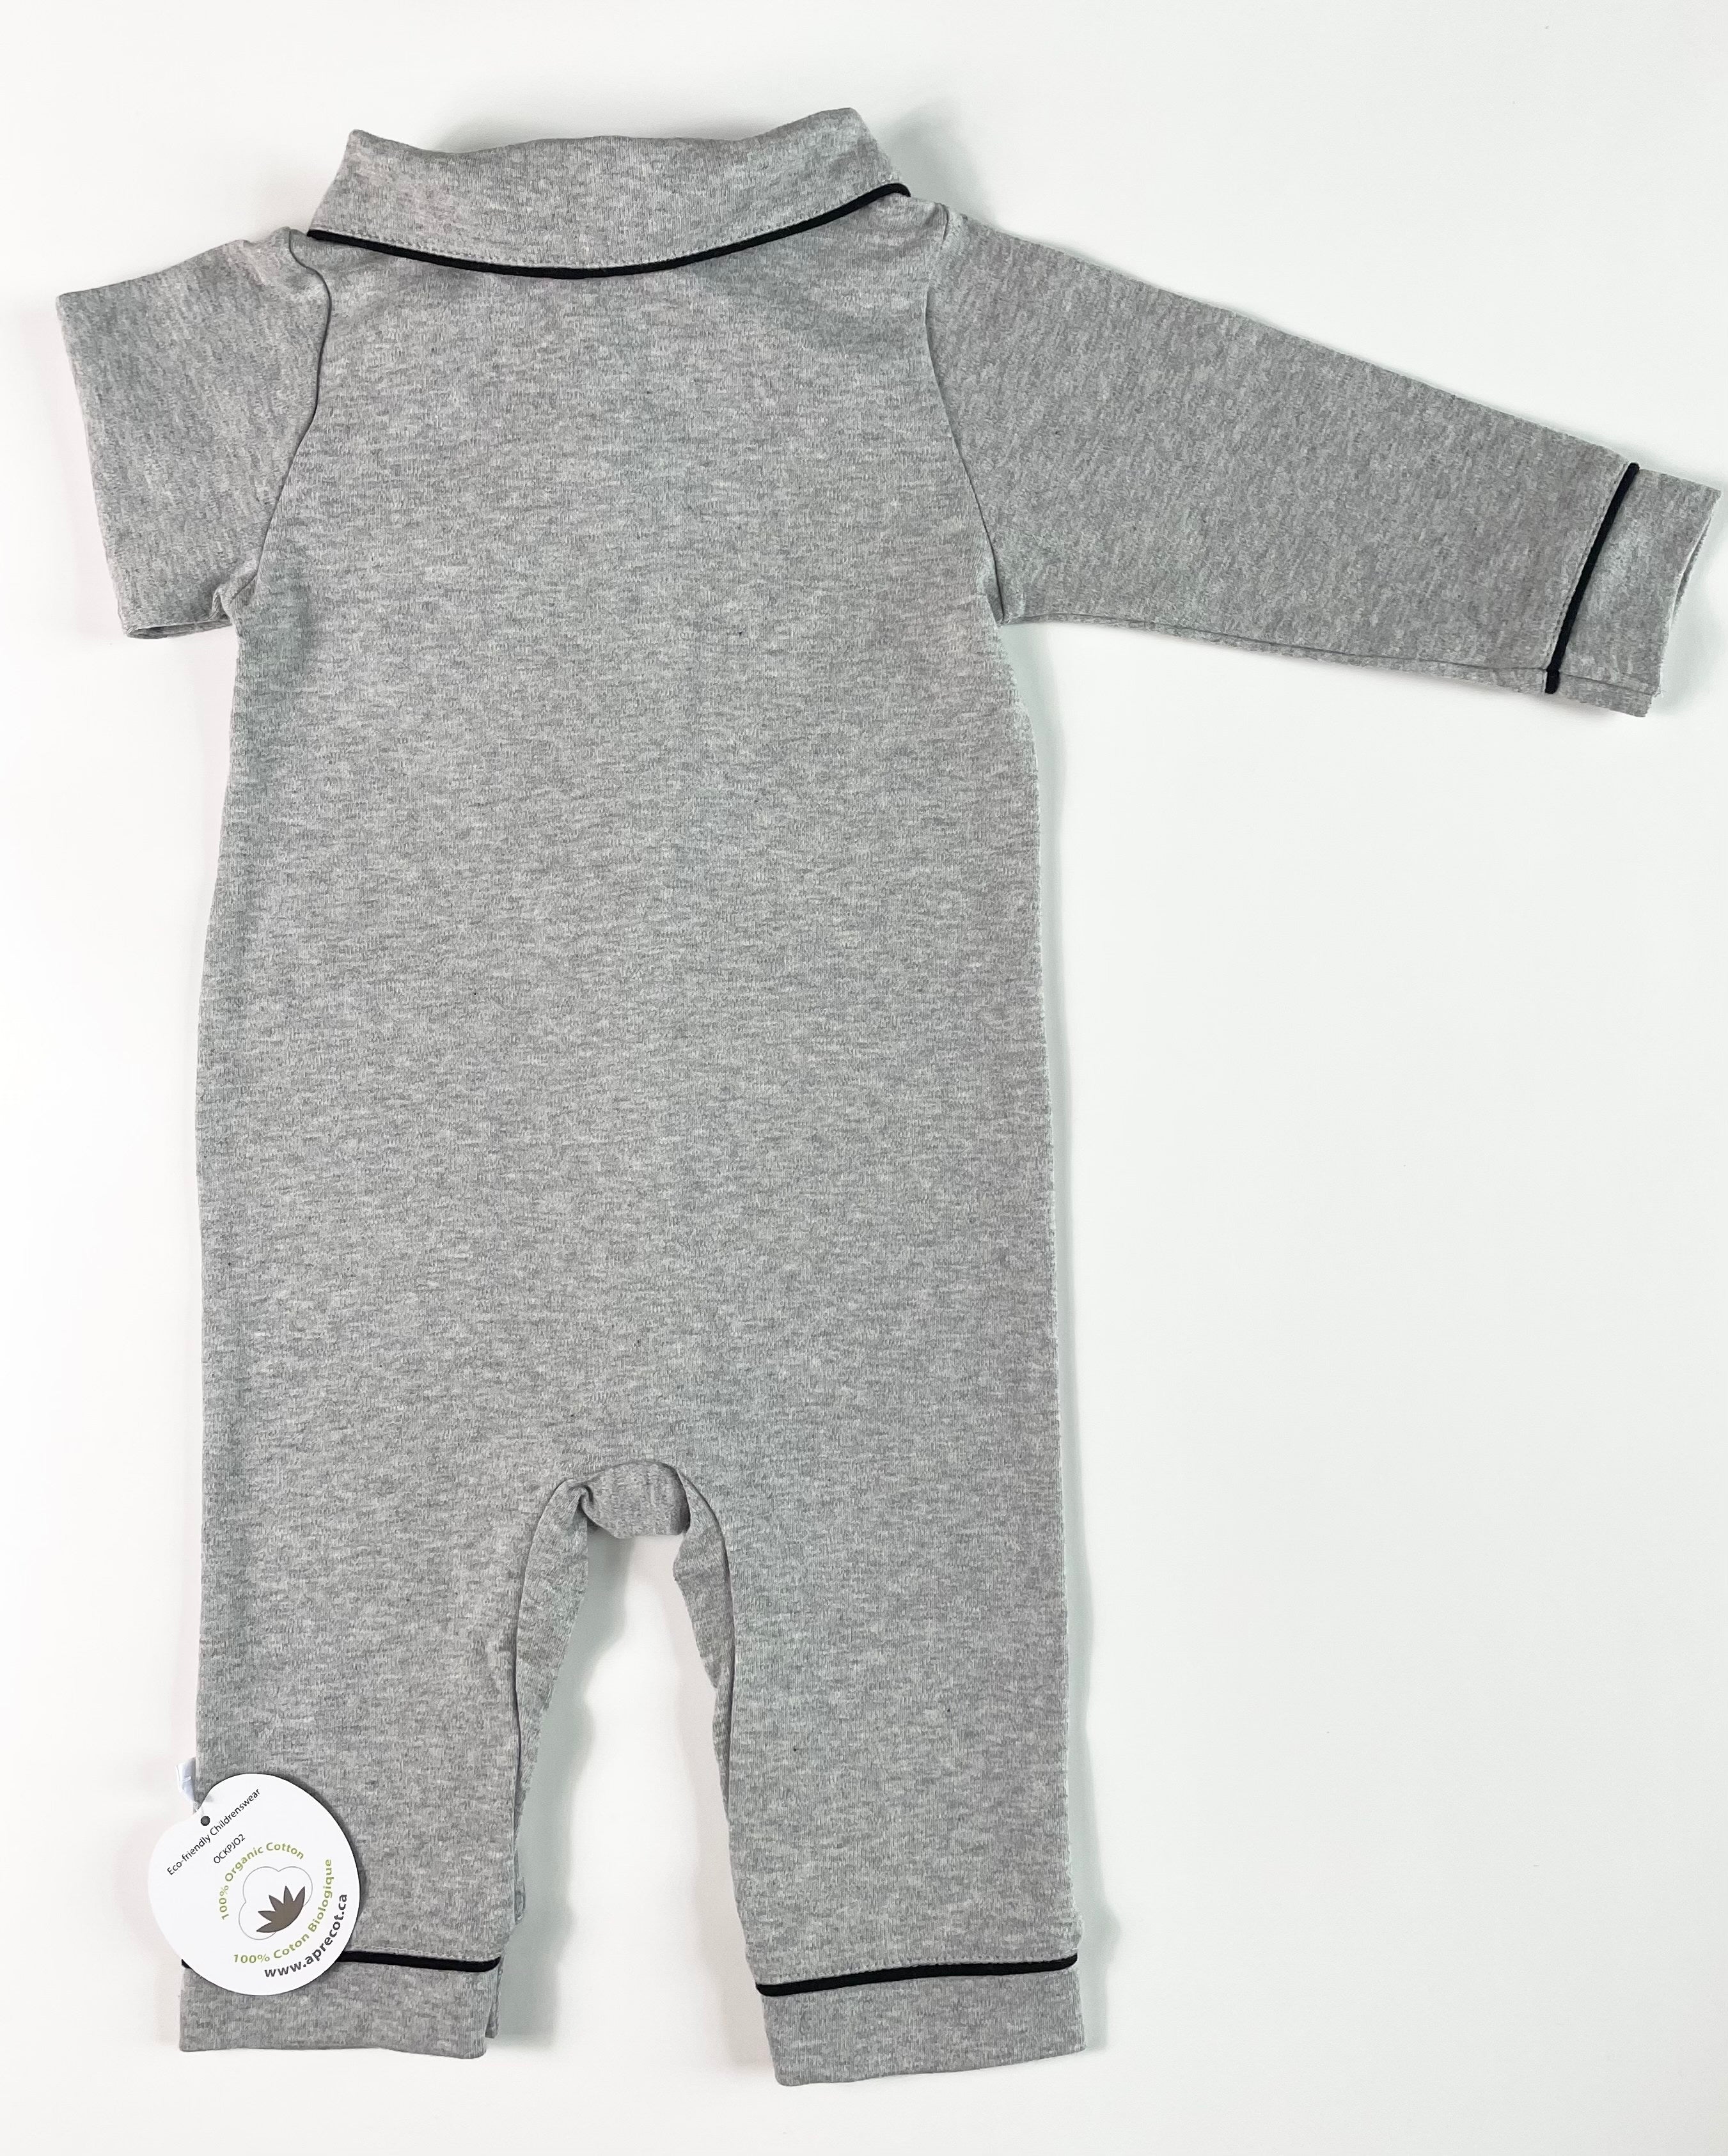 Sweetheart Baby's Organic Cotton Pajamas With Embroidery